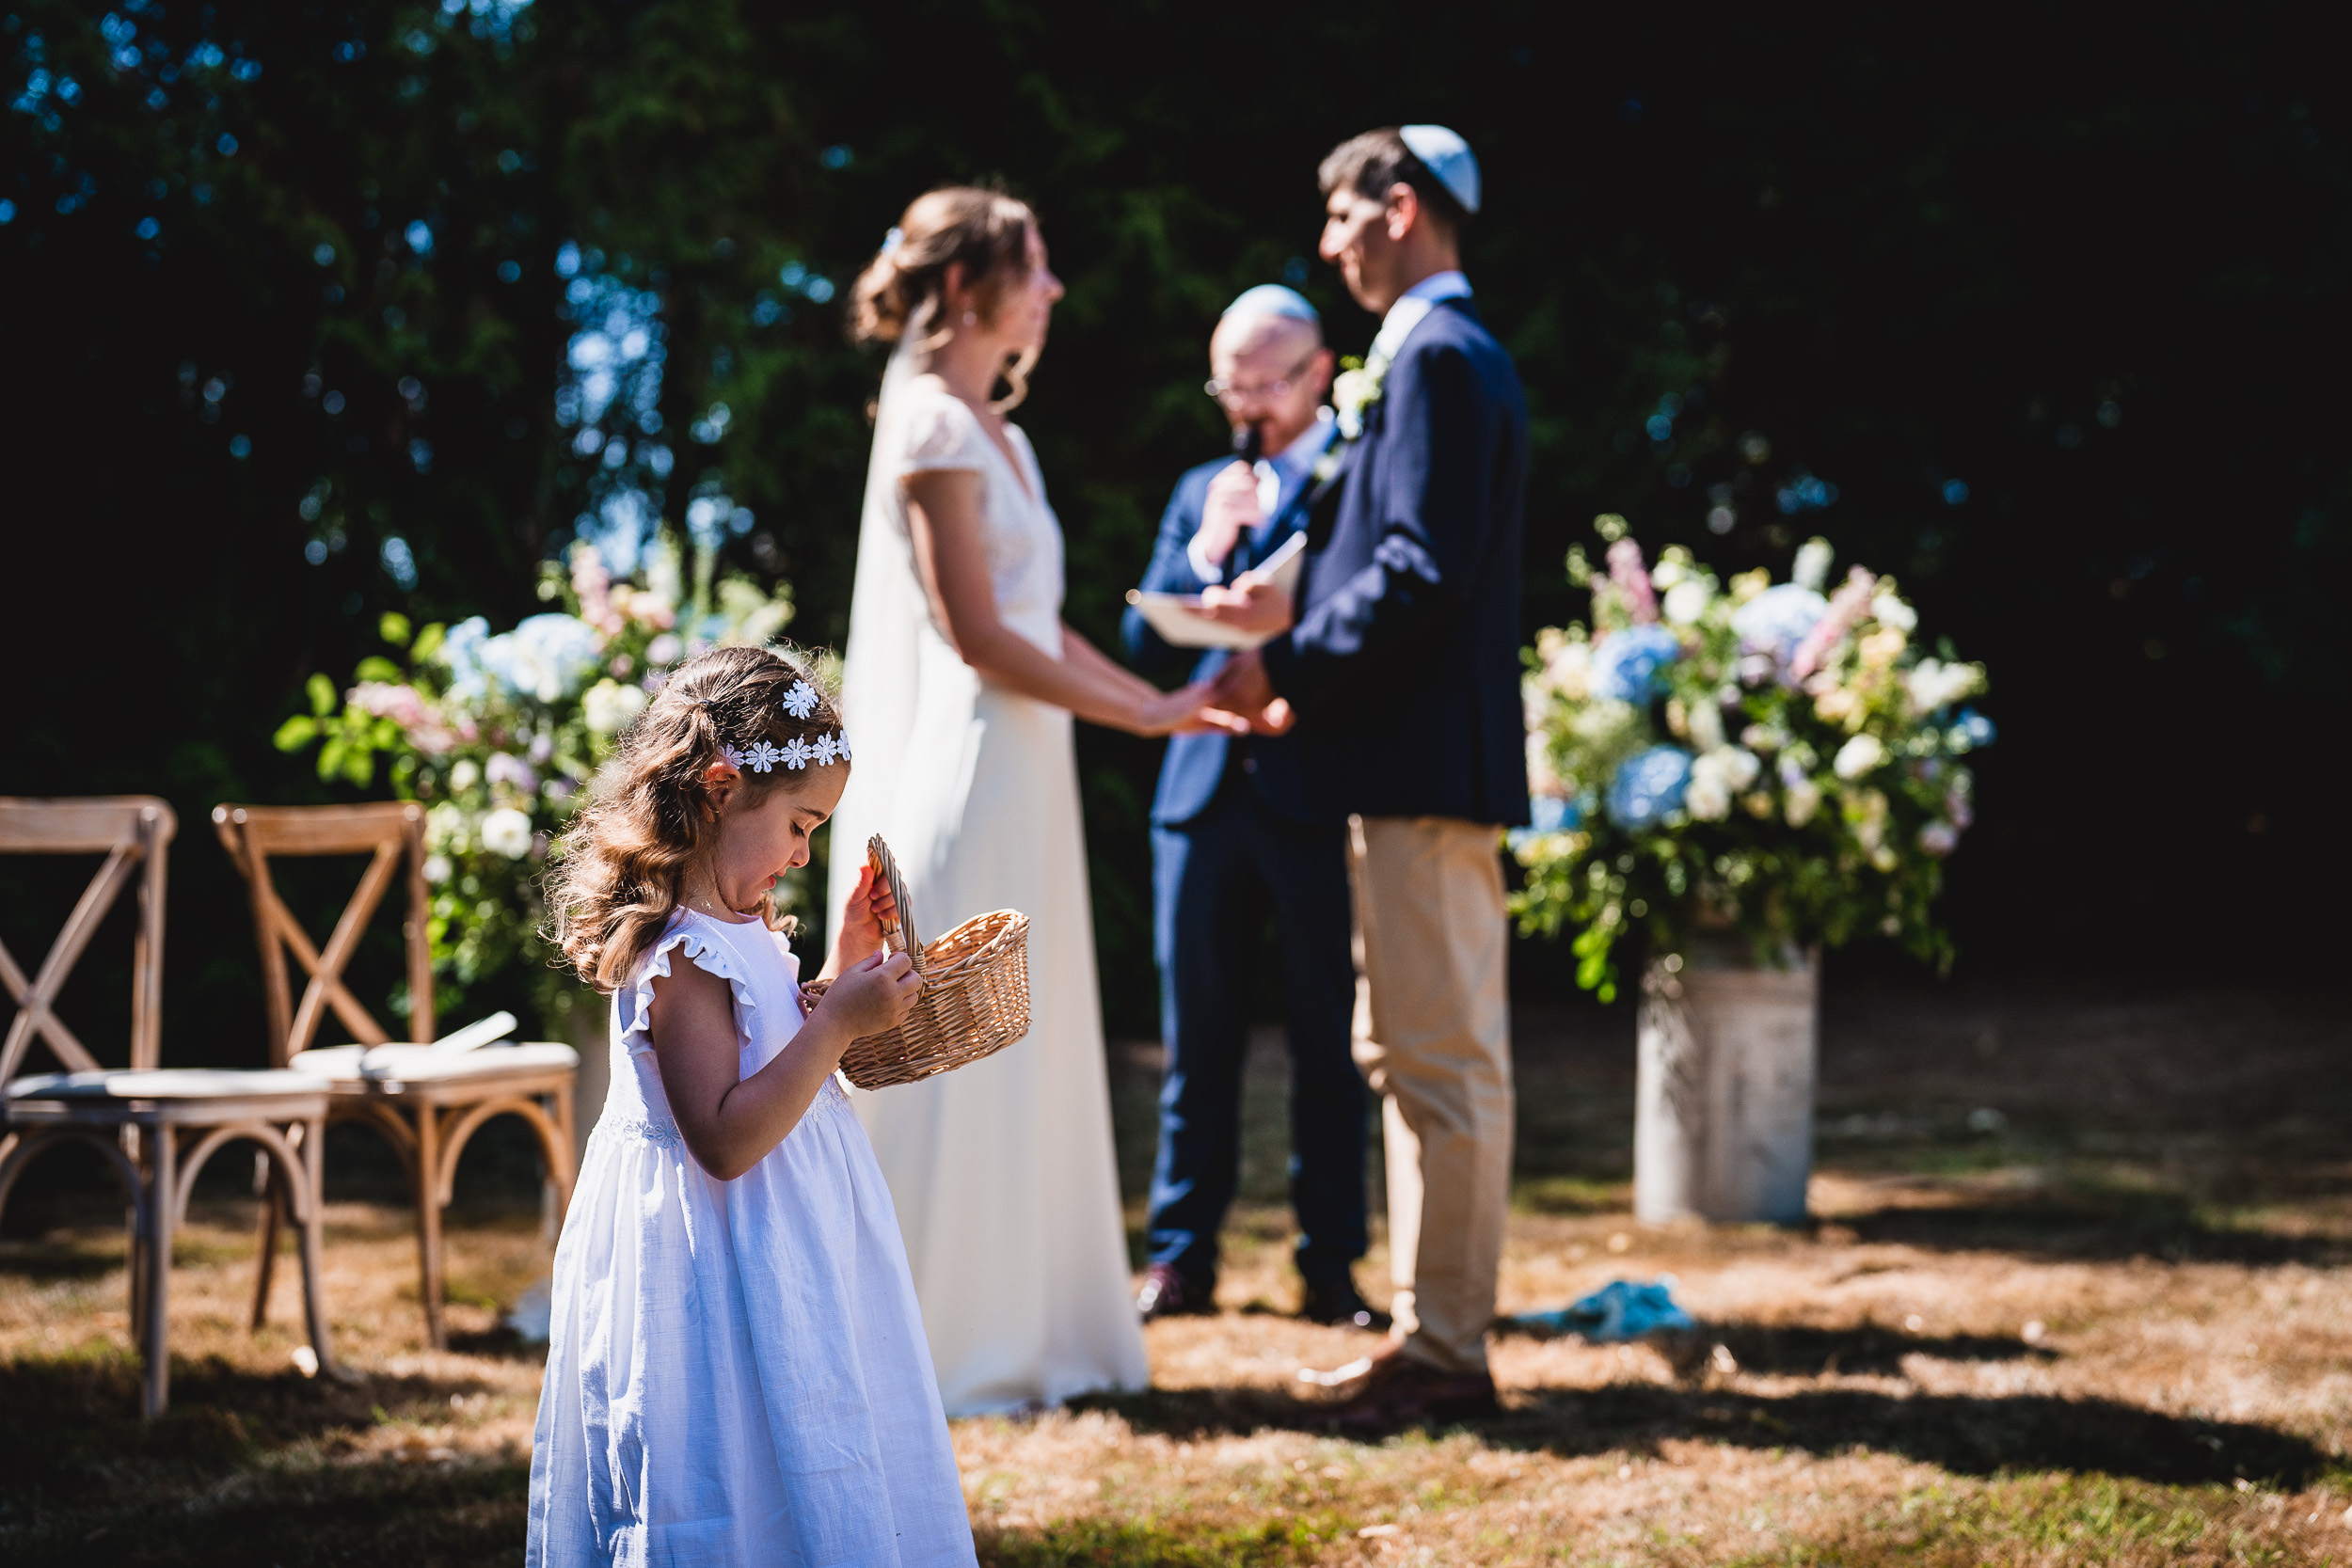 A wedding ceremony featuring a groom and a little girl at the altar, captured by the wedding photographer.